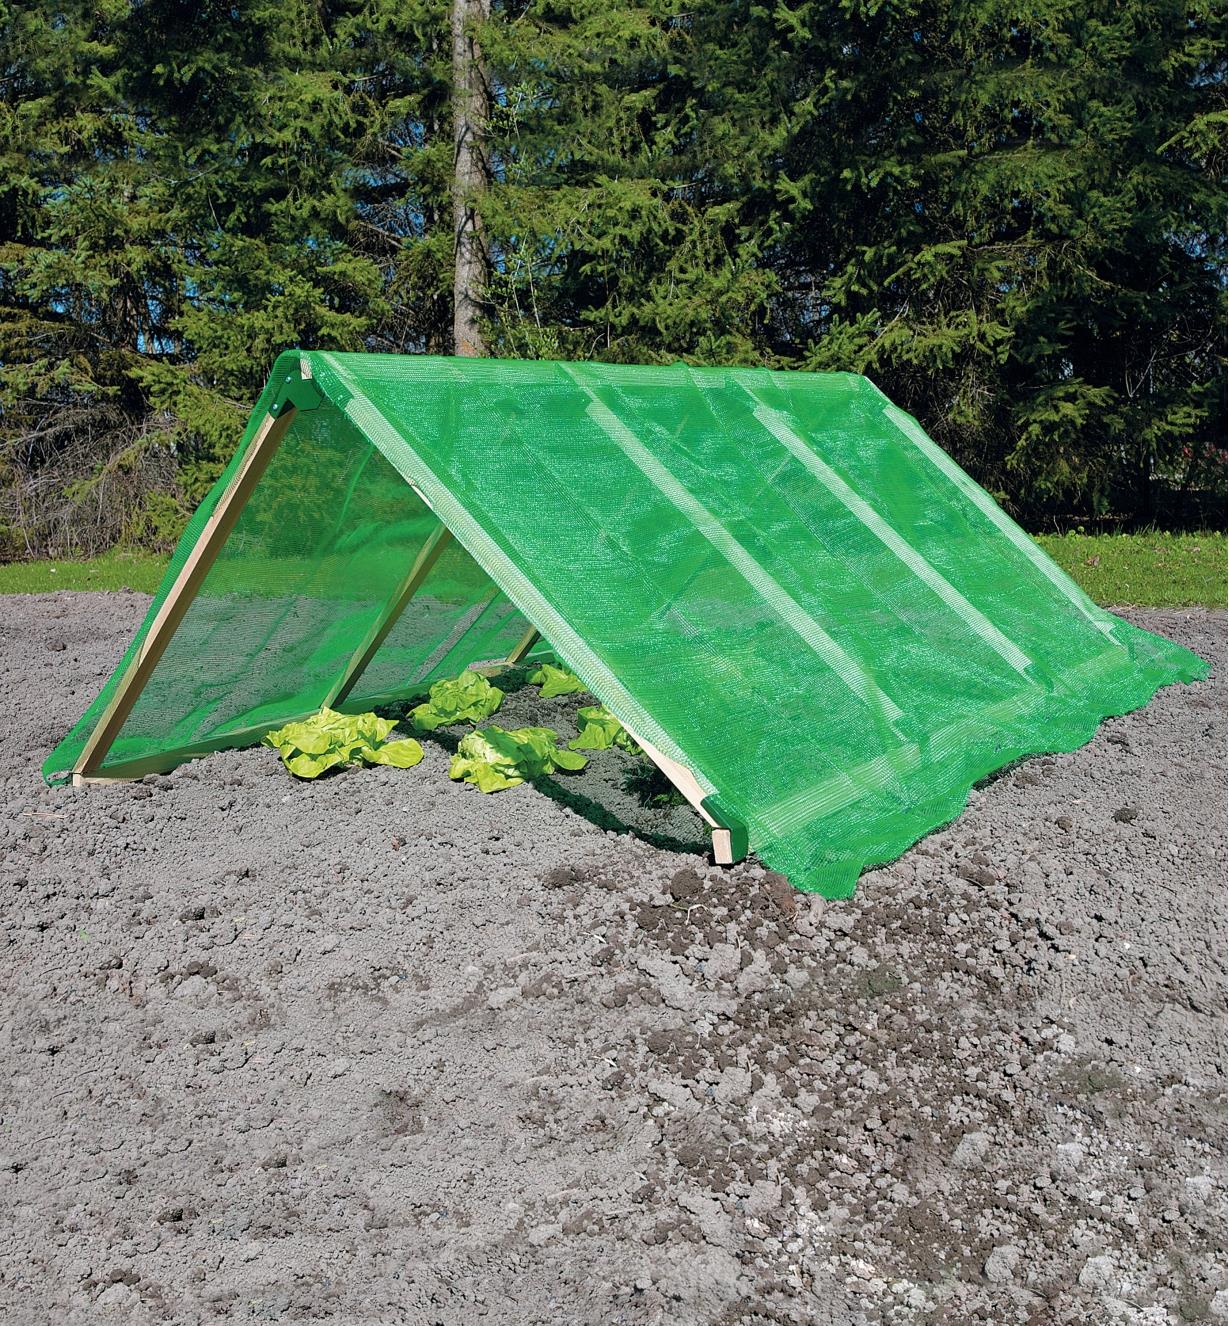 Garden-frame bracket sets used to create a shade-cloth covered triangular structure over a garden bed